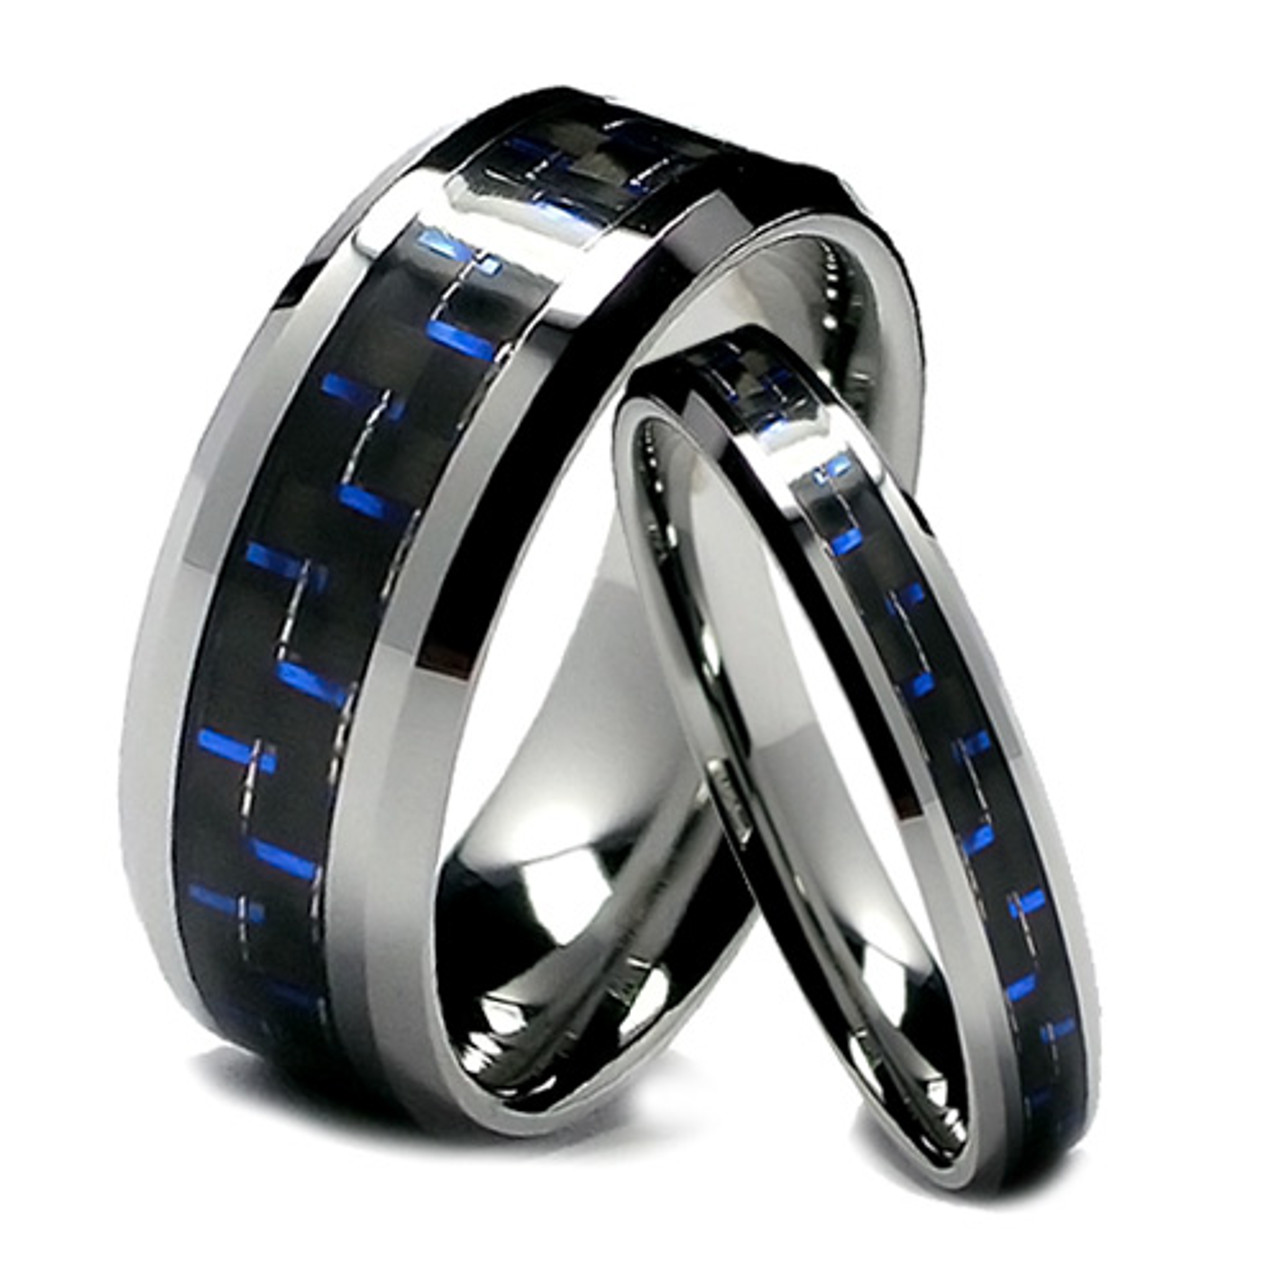 Jewels By Lux Titanium Black Ti w/Blue Anodized Grooves/Beveled Edge 8mm Band